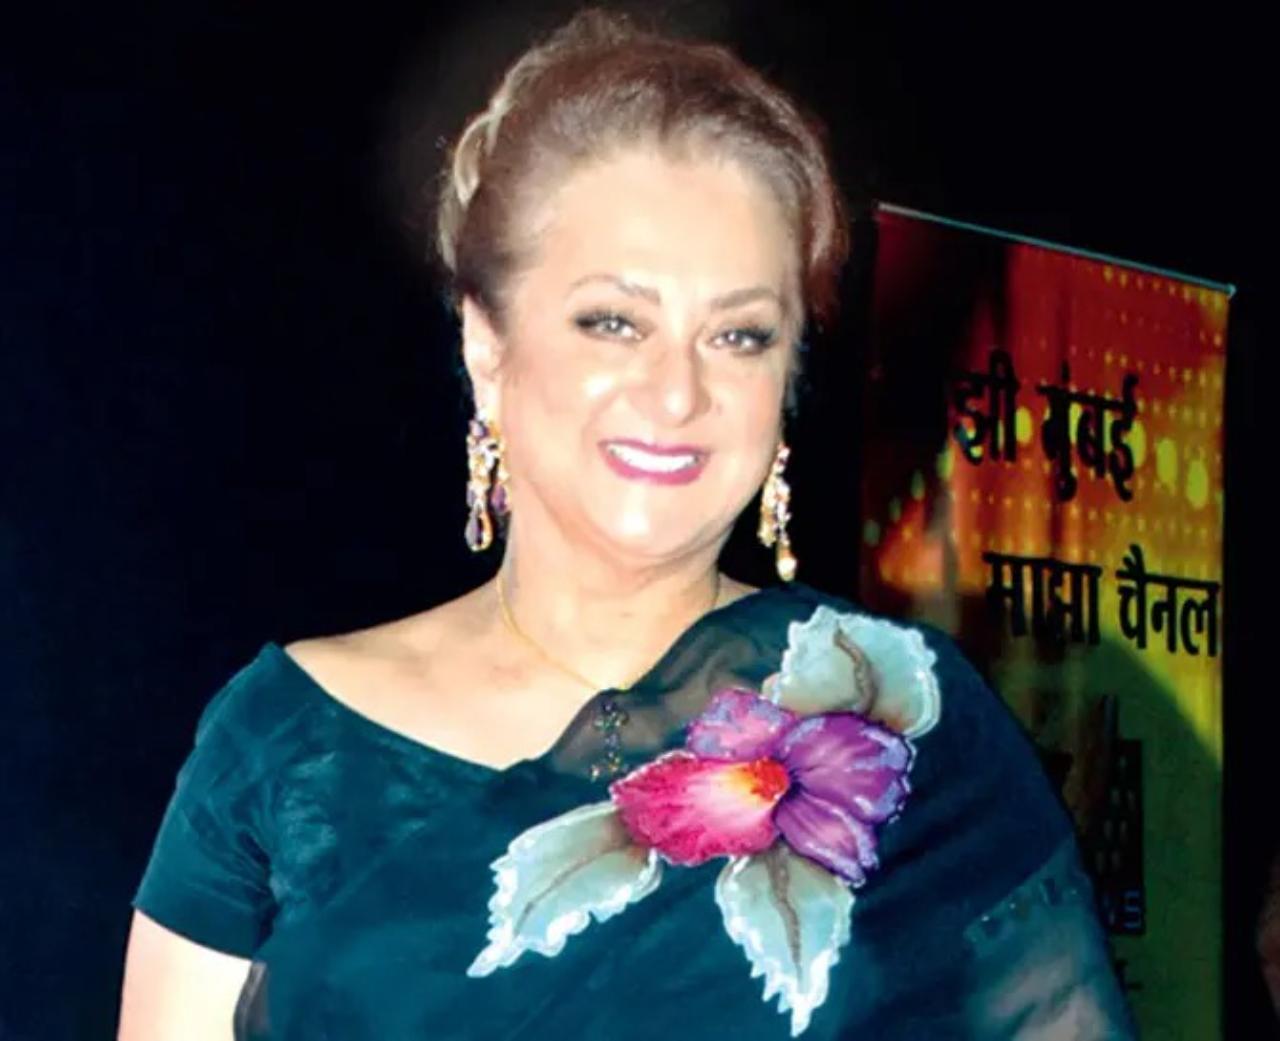 Saira Banu 
Saira Banu suffered a minor attack in September 2021. Her husband Dilip Kumar had passed away a month before that in July 2021 at the age of 98